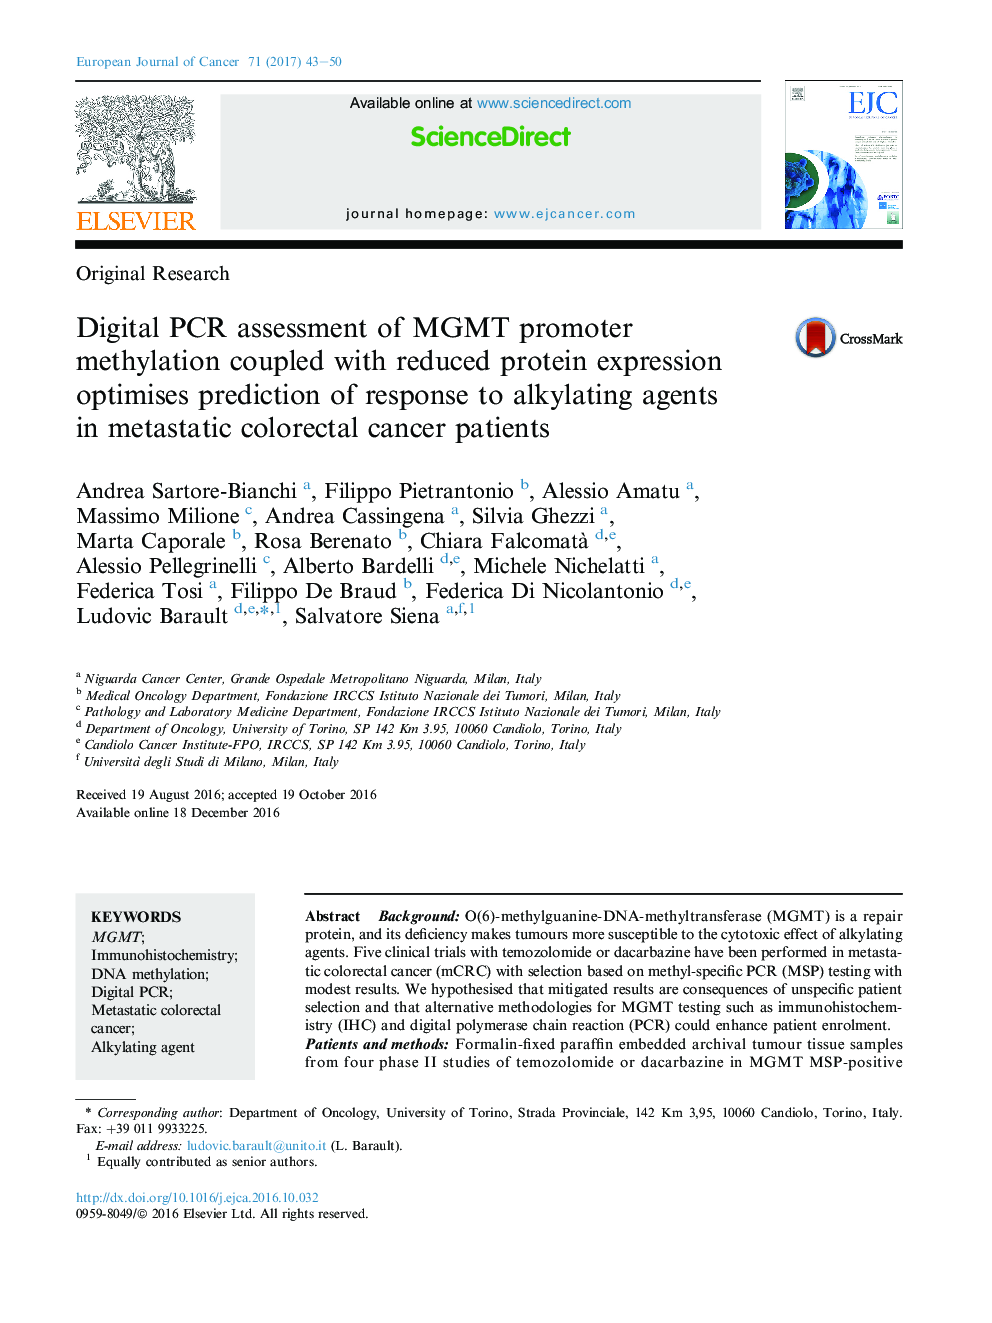 Original ResearchDigital PCR assessment of MGMT promoter methylation coupled with reduced protein expression optimises prediction of response to alkylating agents inÂ metastatic colorectal cancer patients